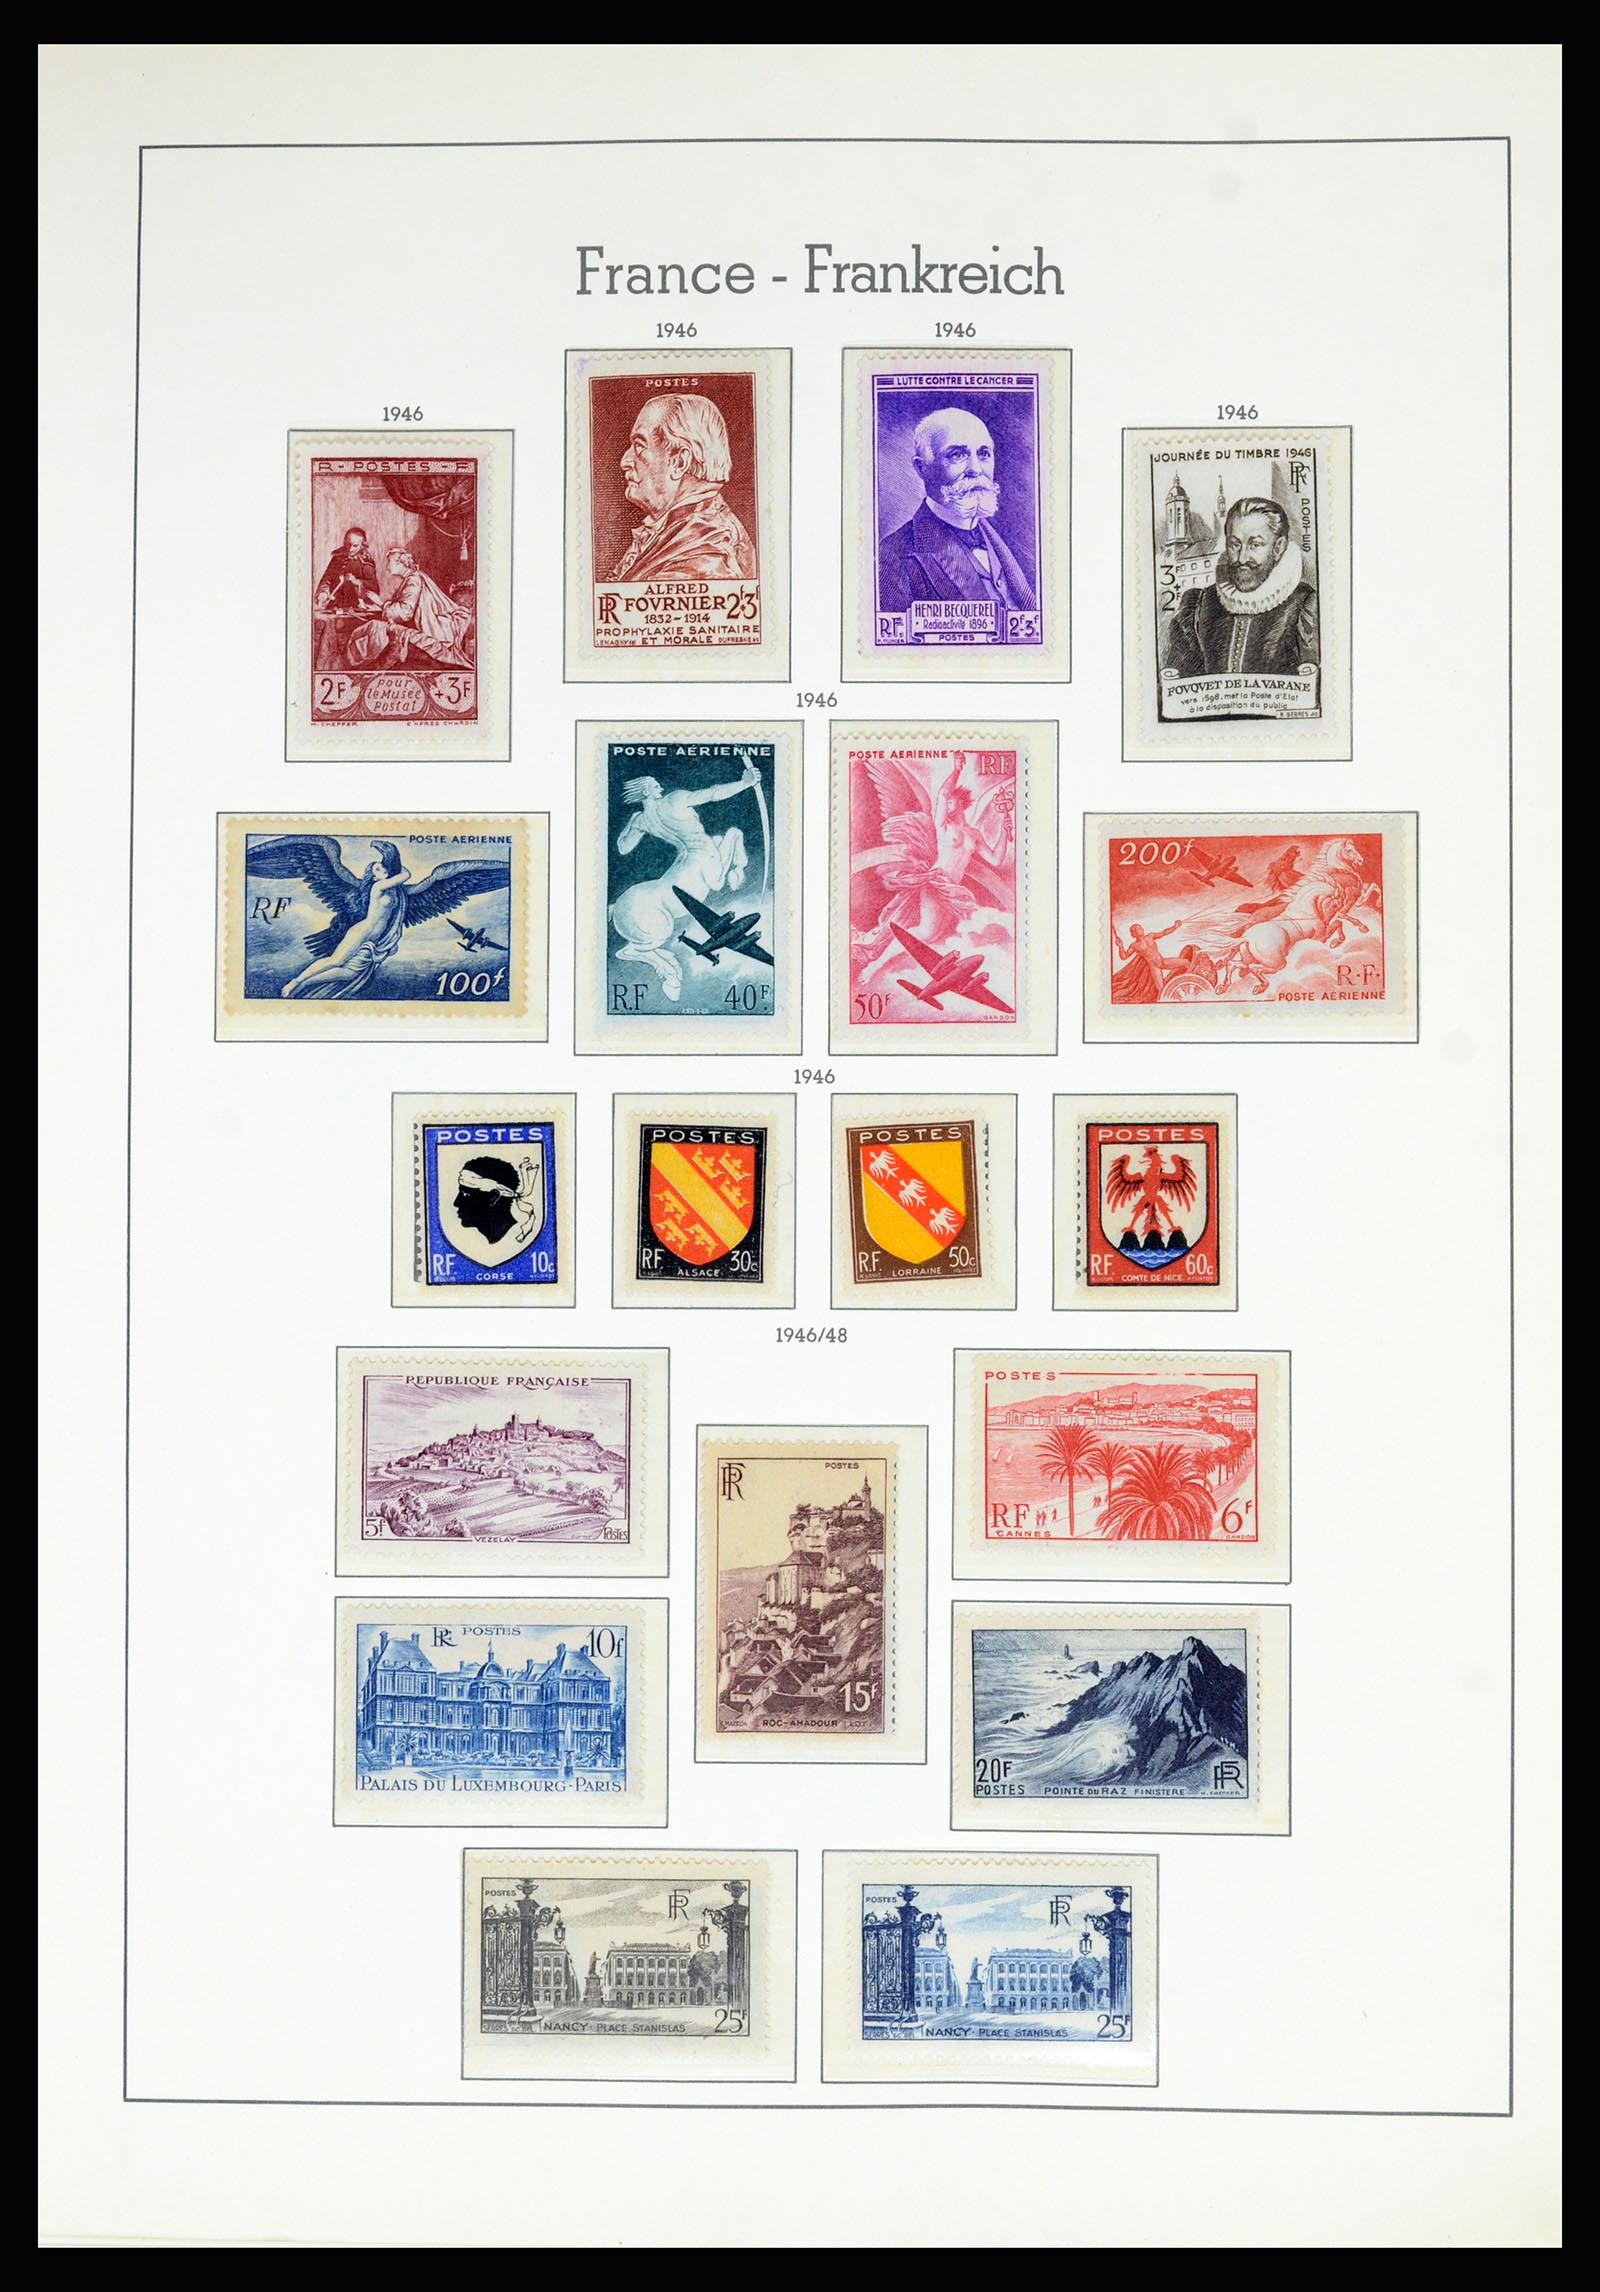 36694 054 - Stamp collection 36694 France 1863-2006.